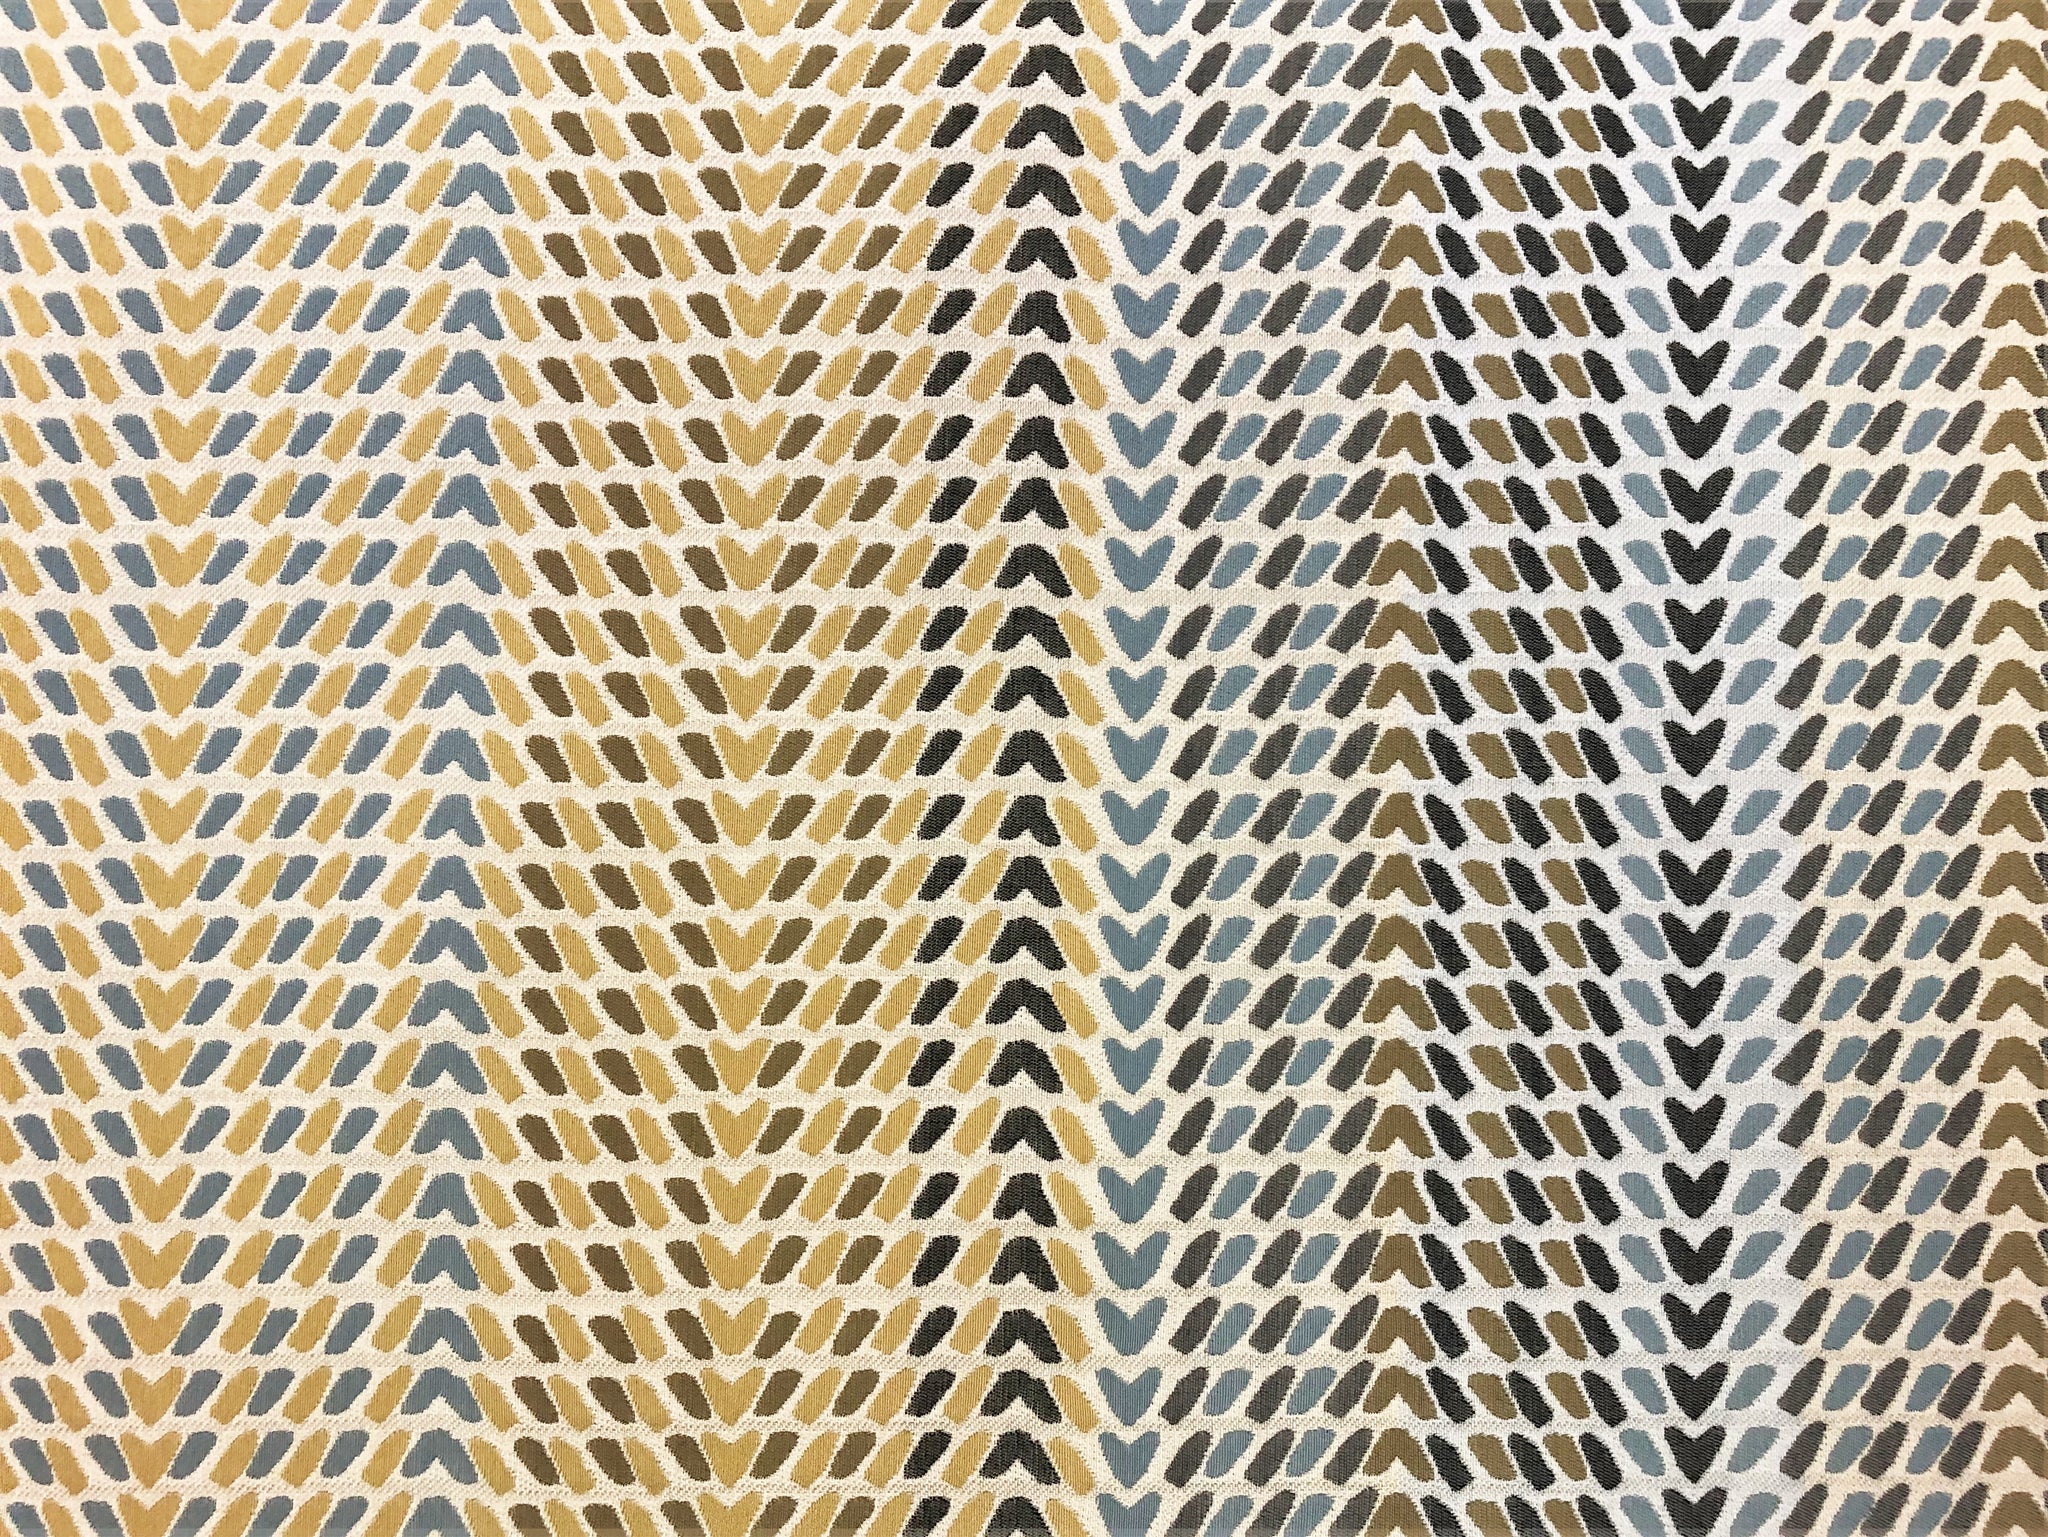 Gold, Brown & Olive Green Stripe Denim Fabric - By The Yard – In-Weave  Fabric